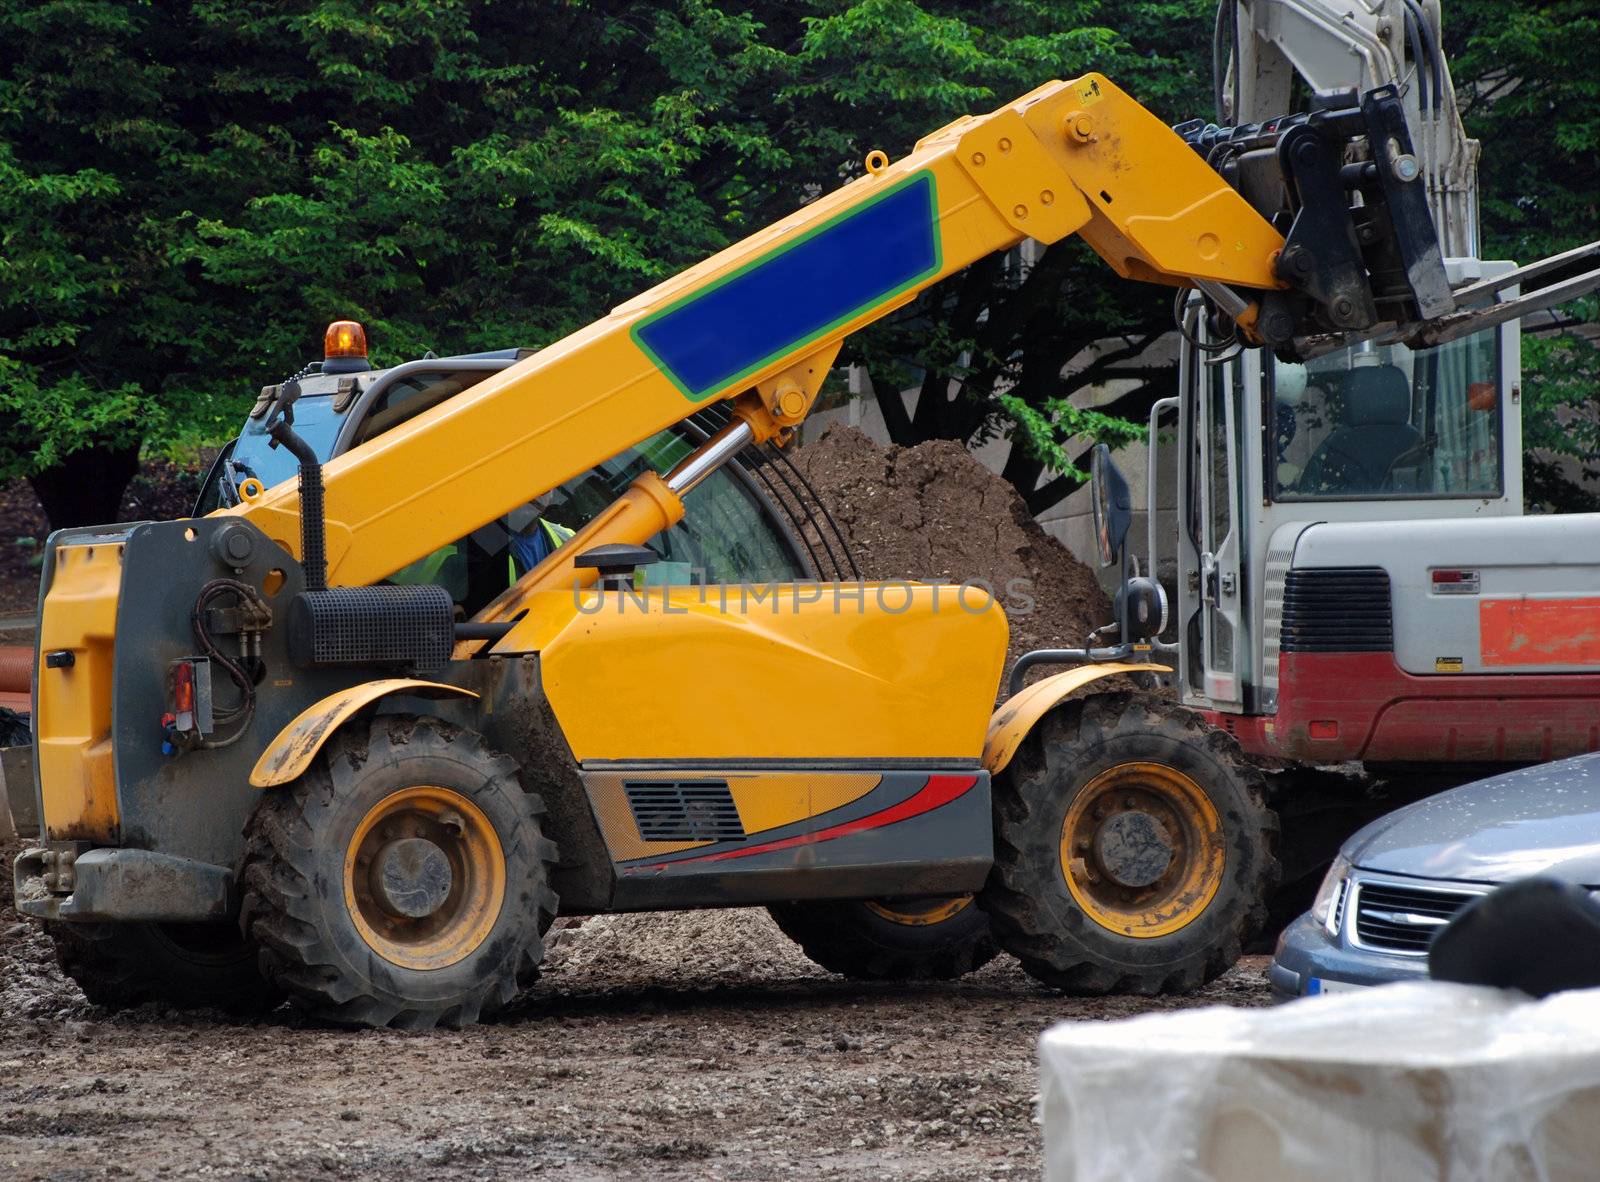 A photograph of a fork-lift truck active on an English building site